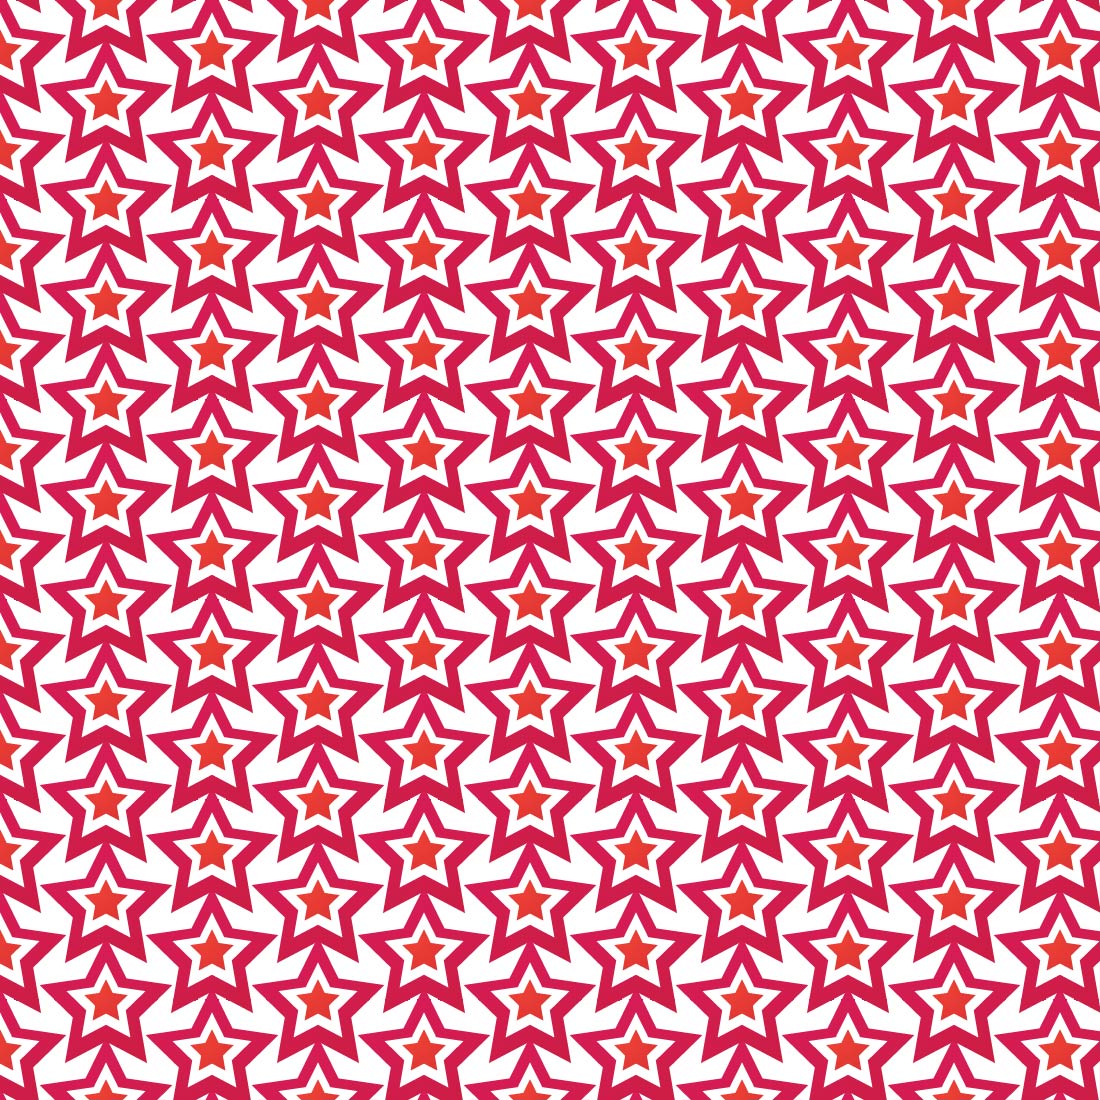 Red colorful pattern design.